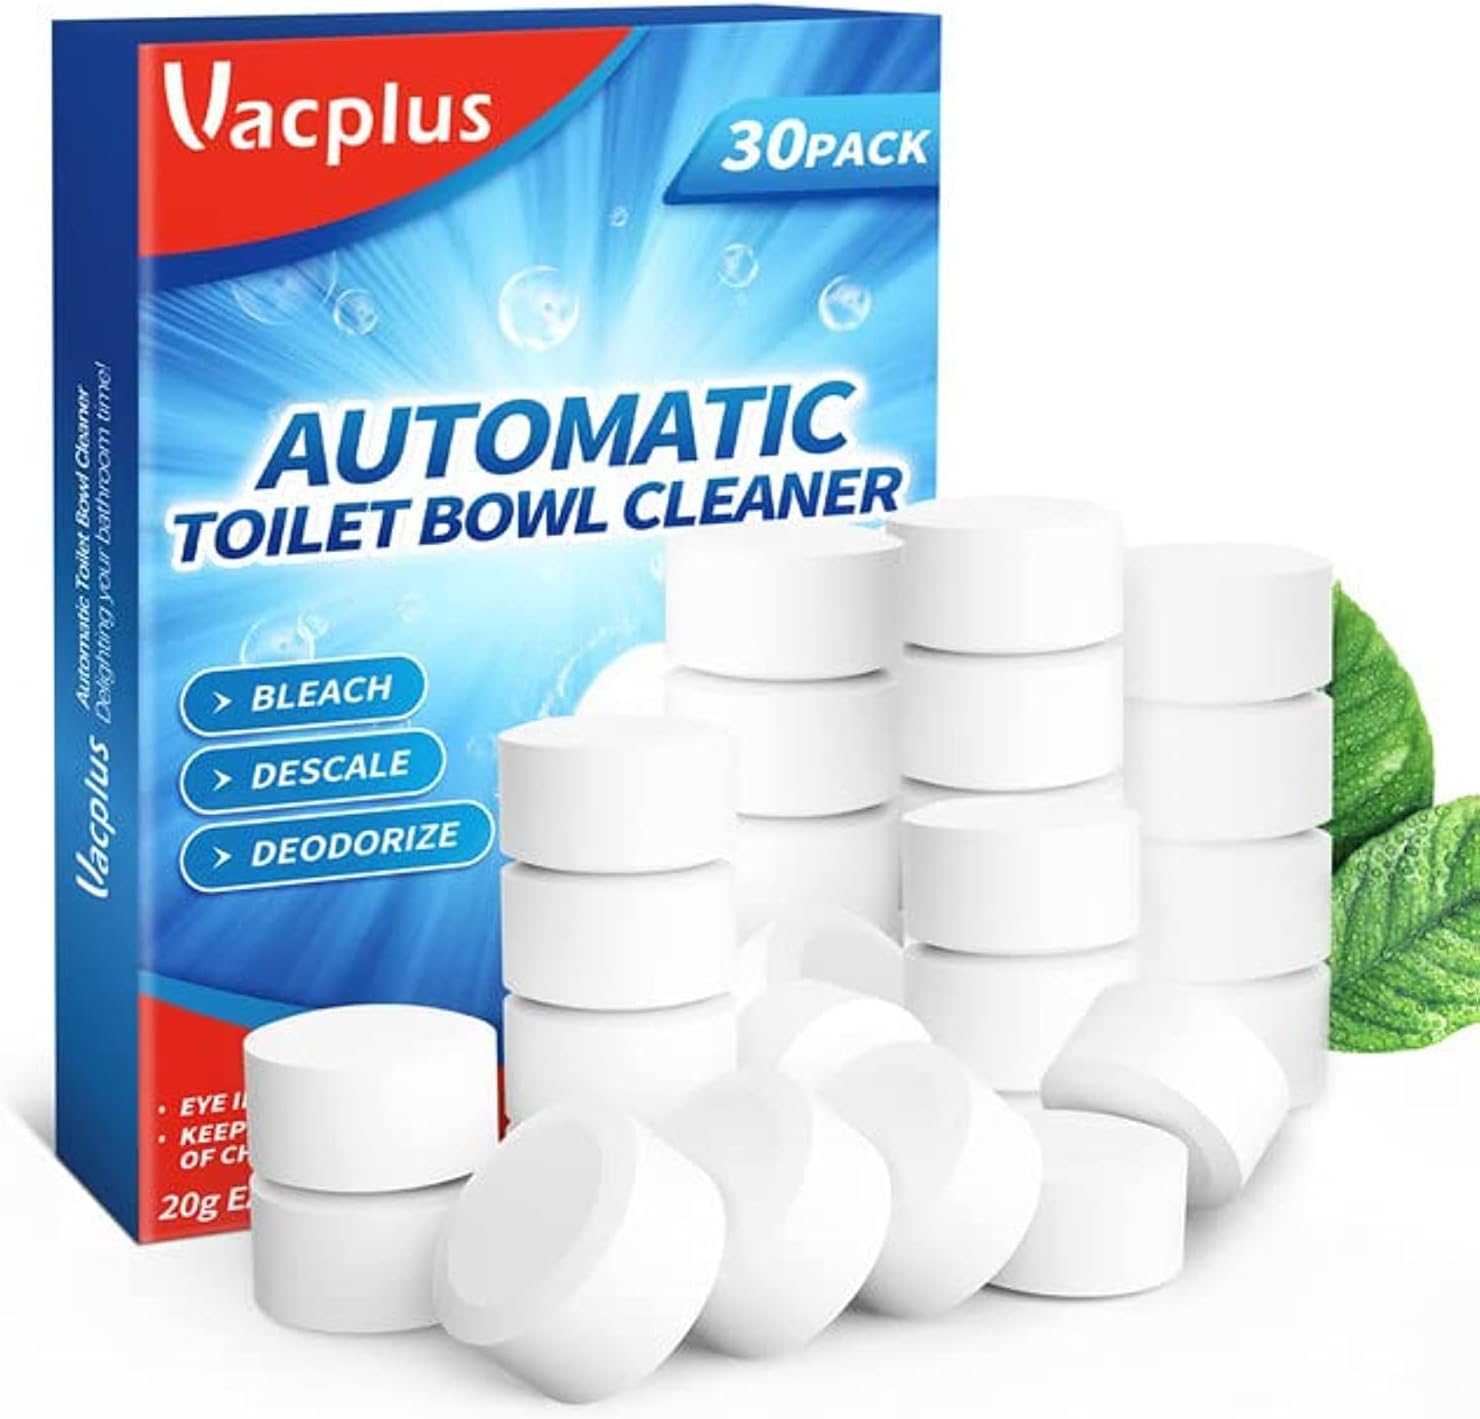 Vacplus Toilet Bowl Cleaners - 30 PACK, Automatic [...]